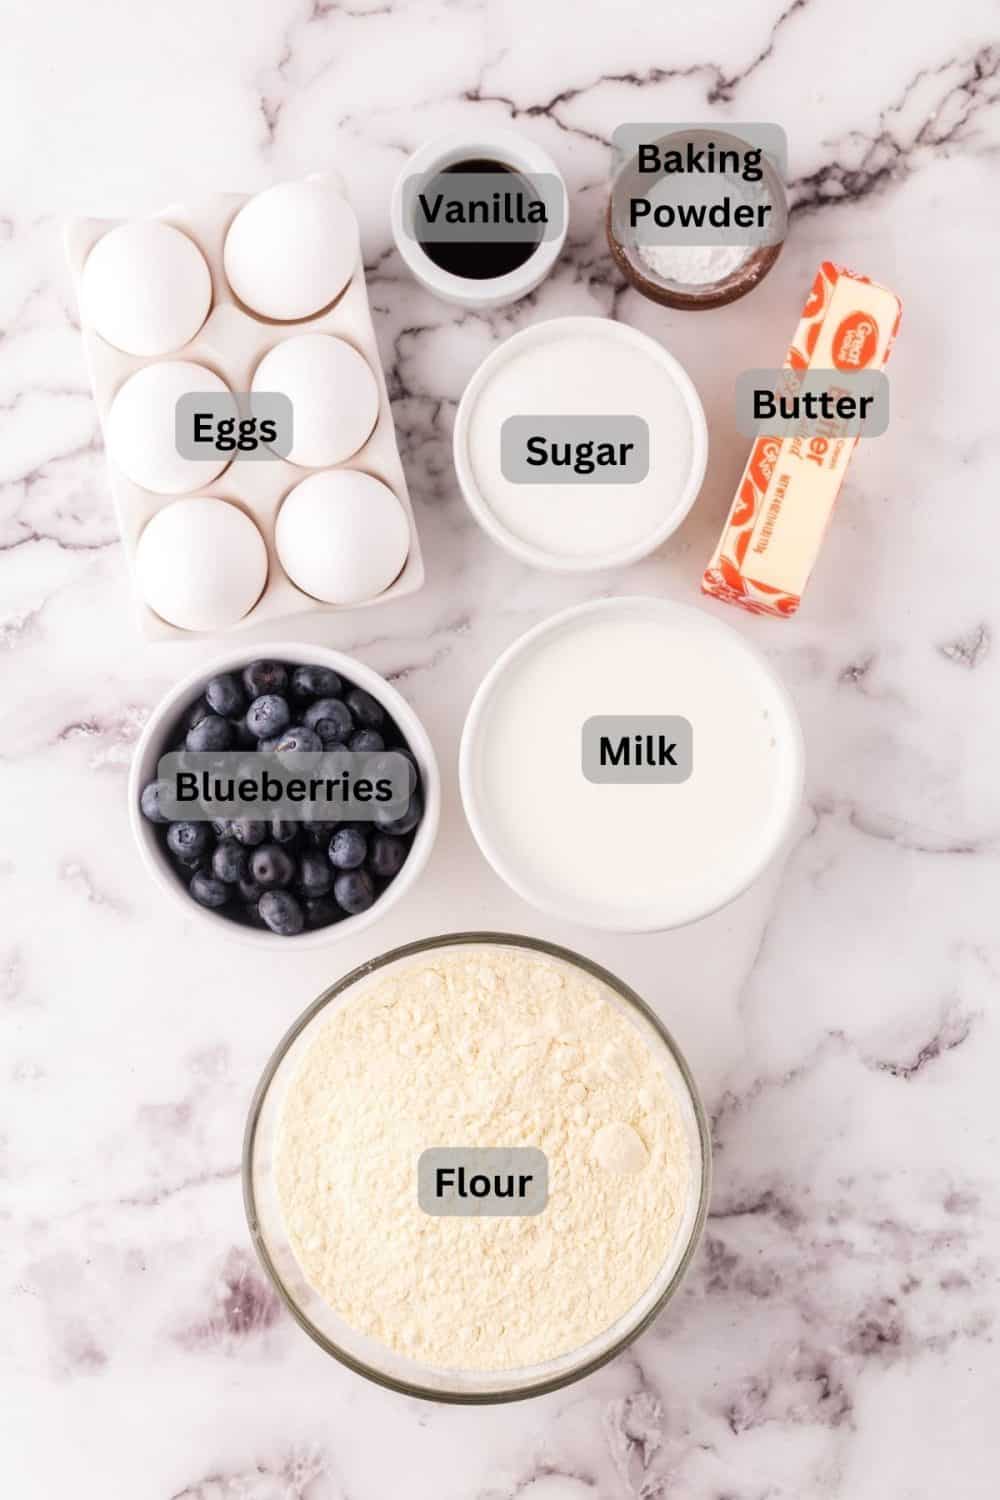 Labeled ingredients for blueberry pancakes.